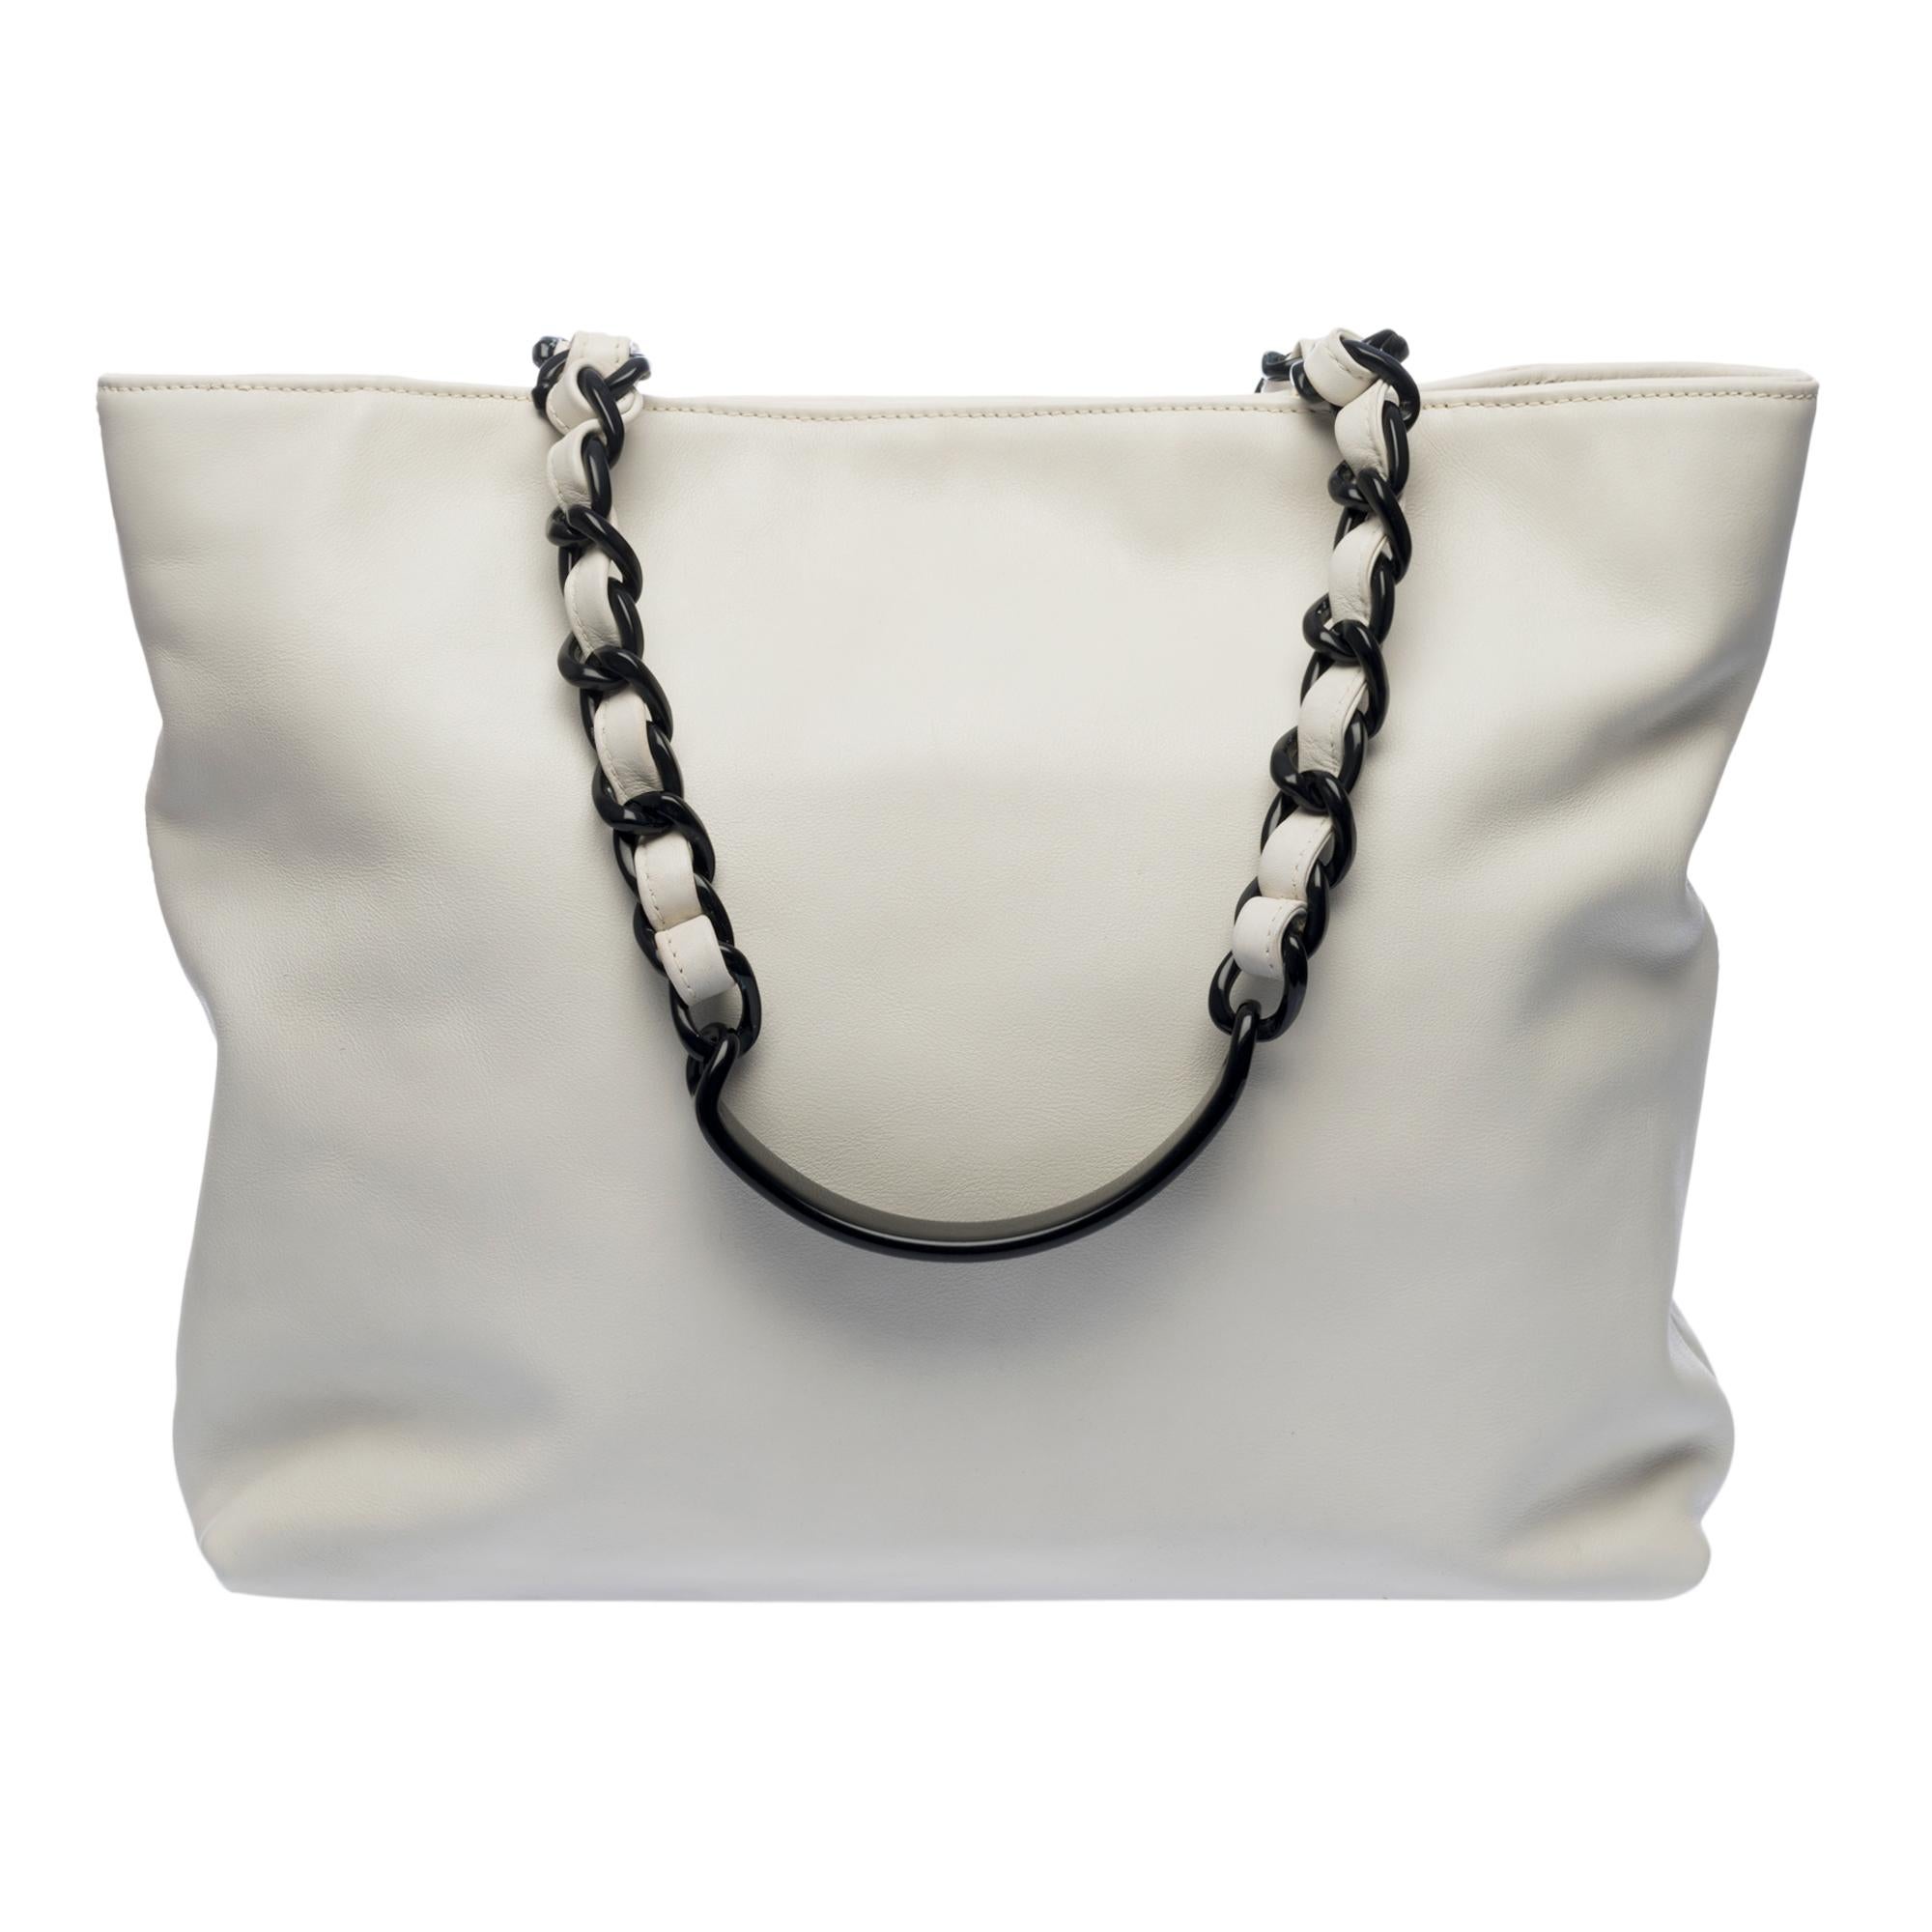 Chanel Tote Bag in white lambskin, gold-tone metal hardware and black plastic handle intertwined with white leather for shoulder support
White canvas lining, 1 zipped pocket
Closure with magnetic buttons
Signature: 